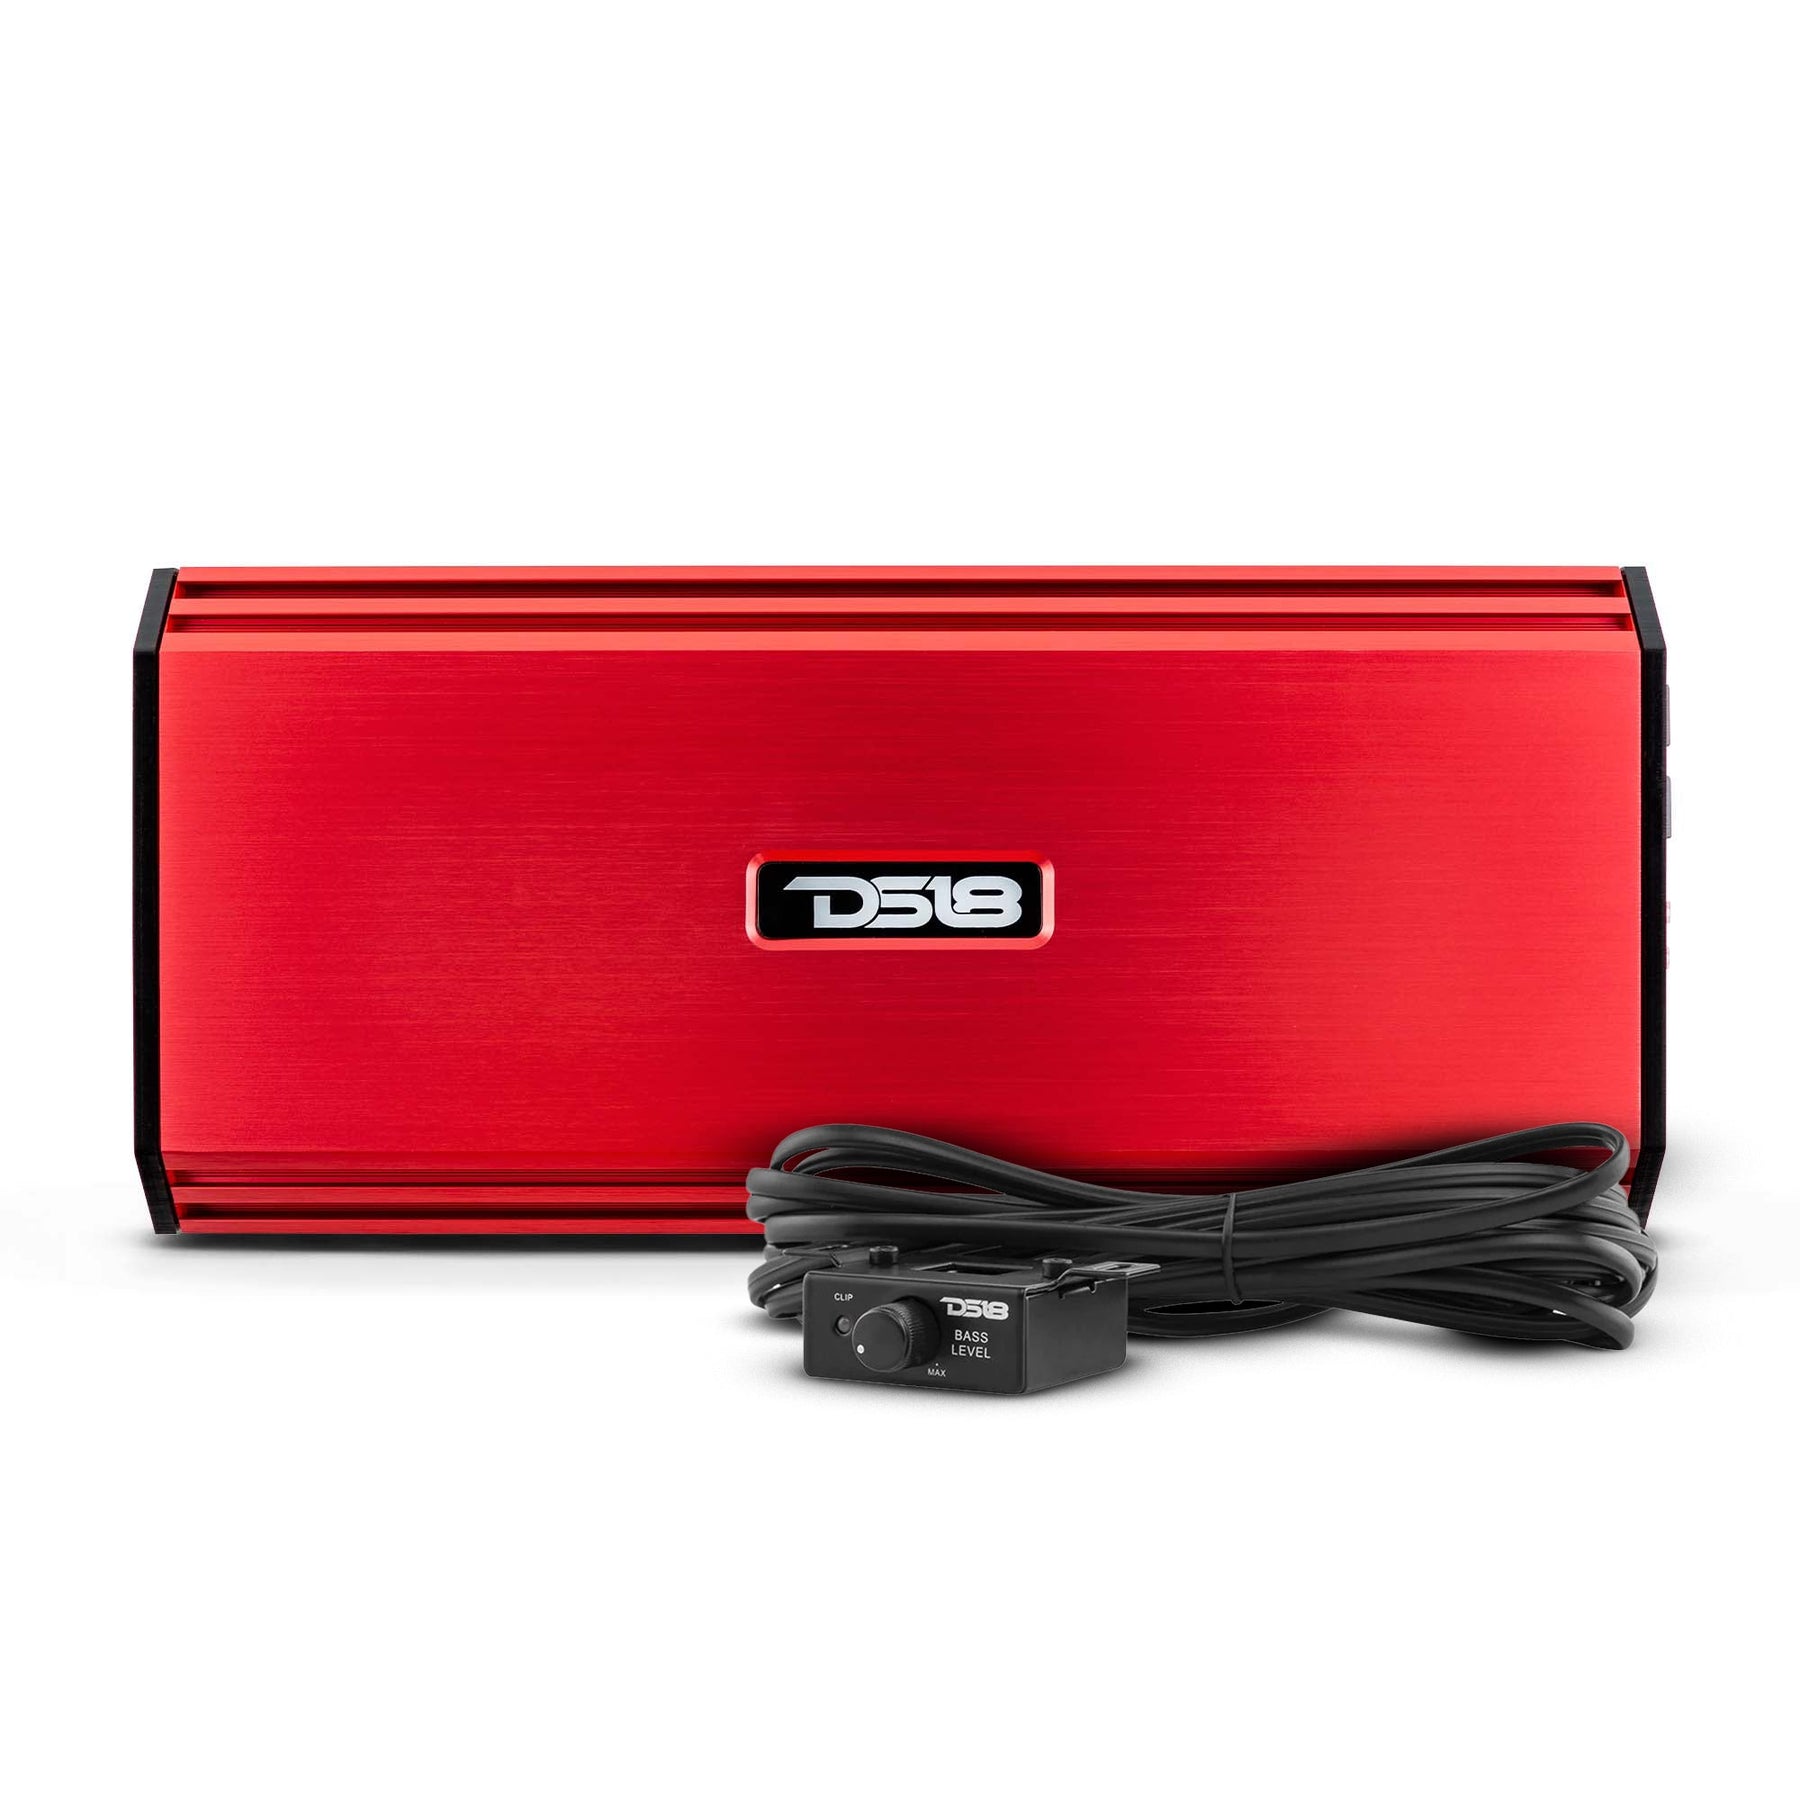 DS18 LSE-210A Bass Package 2 x SLC-MD10.4 In a Ported Box with S-1500.1/RD Amplifier and 4-GA Amp Kit 800 Watts